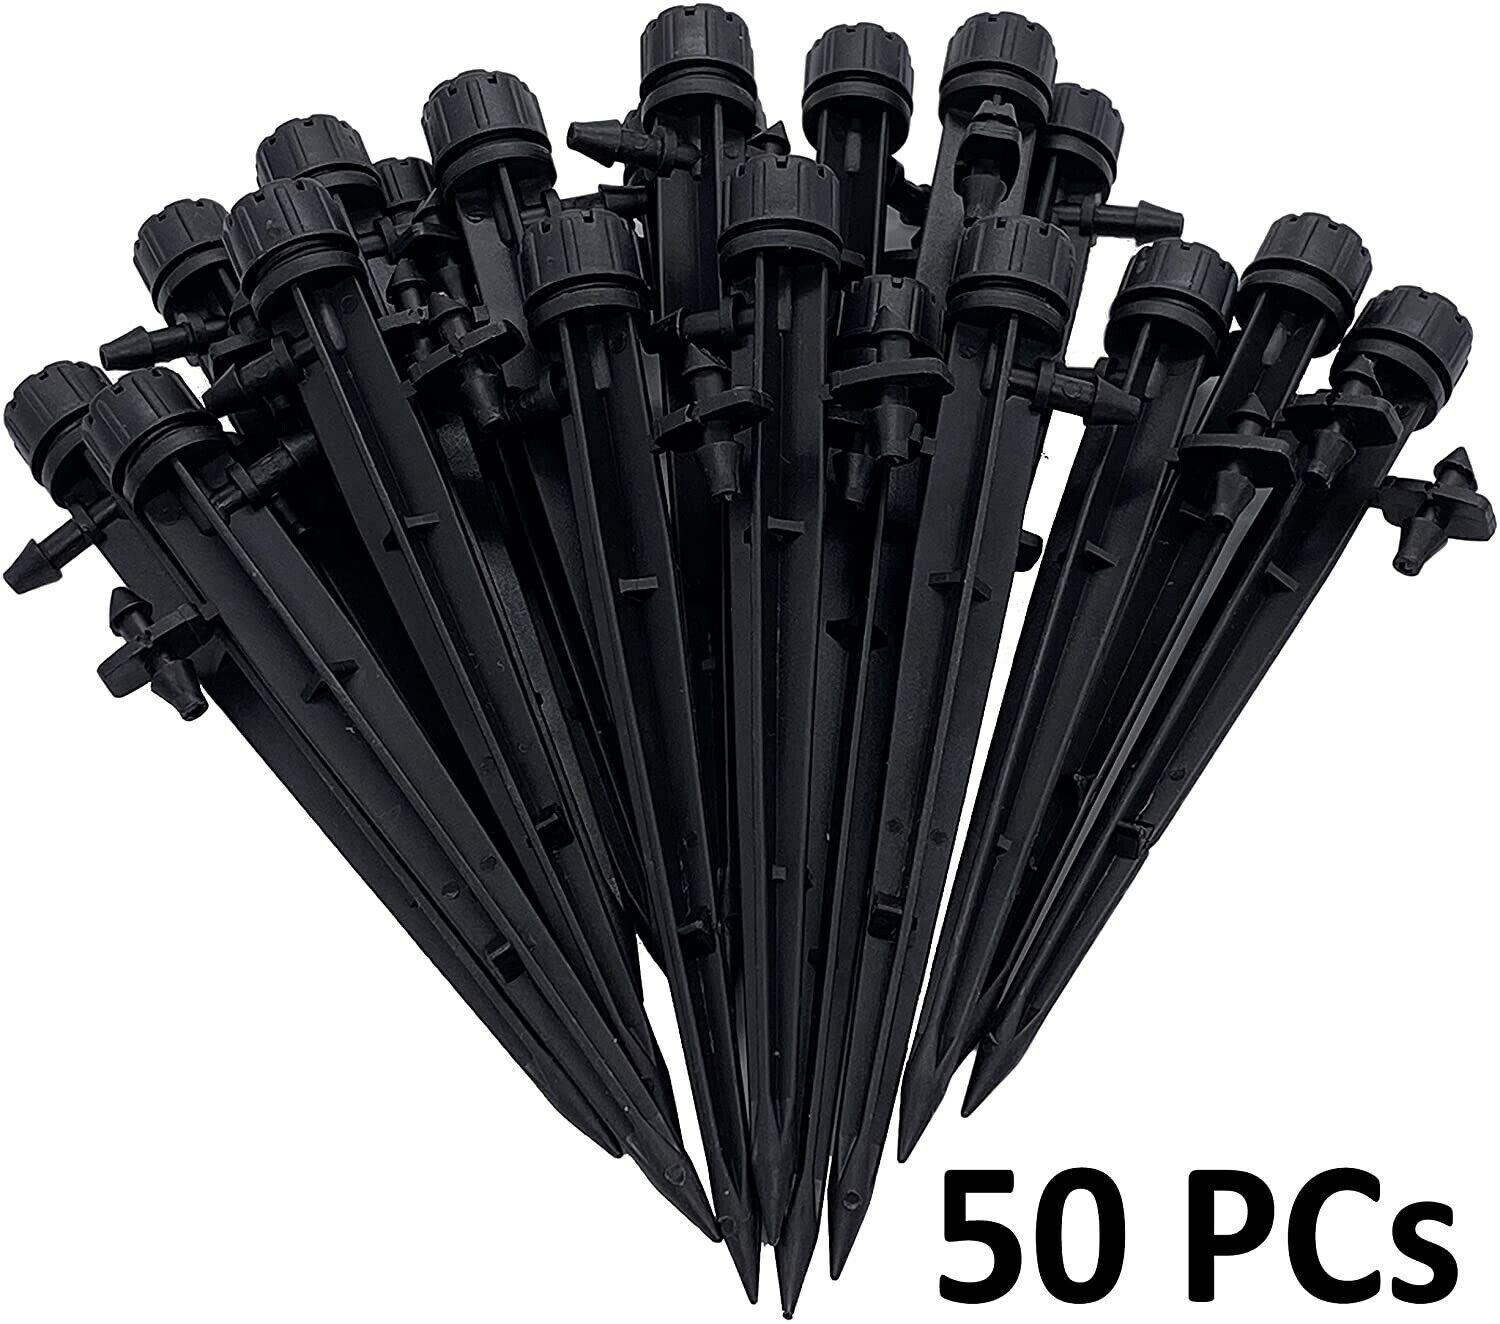 50pcs 360° Adjustable Water Flow Irrigation Drippers Stake Emitter Drip System